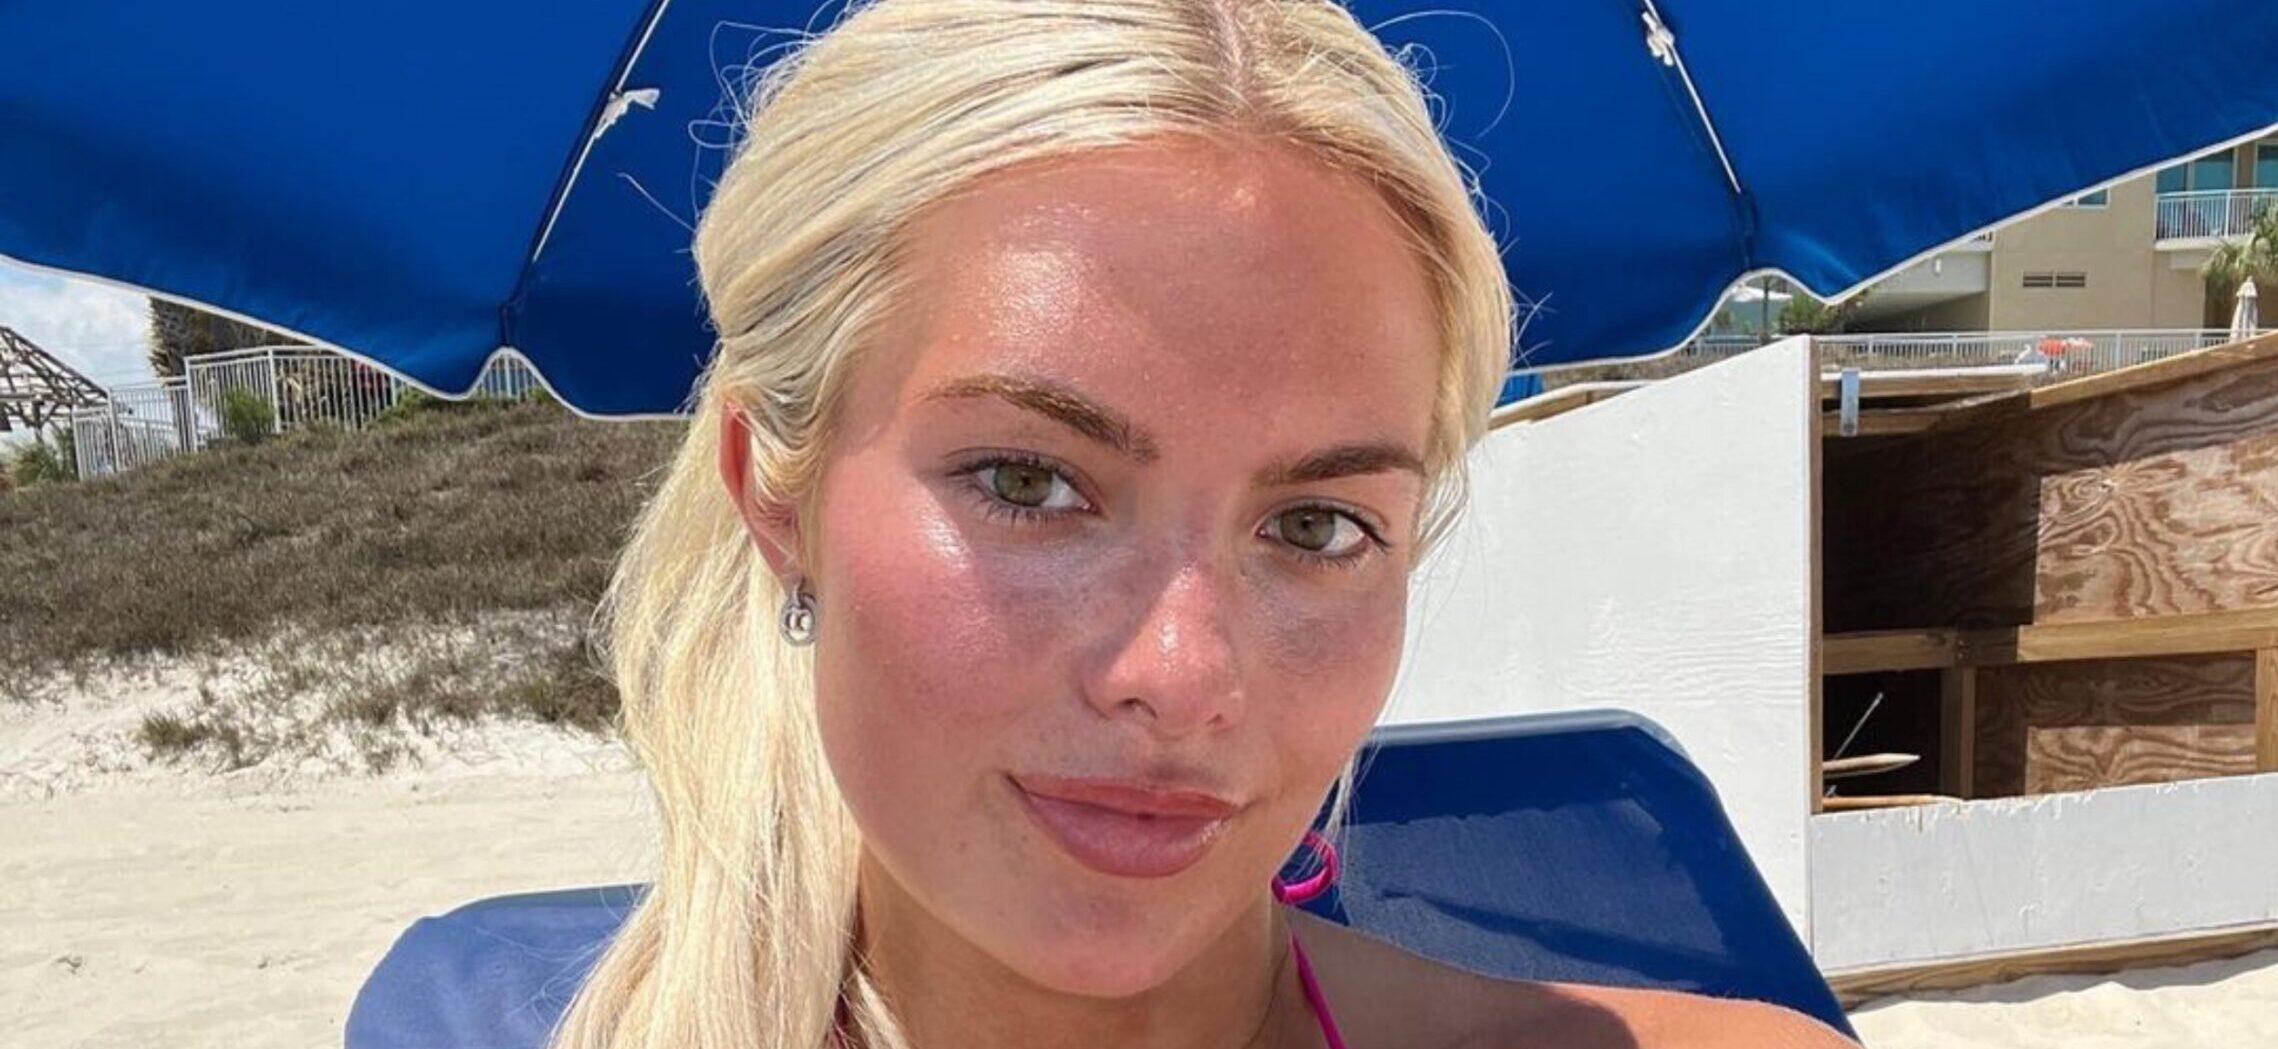 Hannah White Looks ‘Literal Perfection’ While Flaunting Her ‘Hooper Physique’ In Tiny Bikini